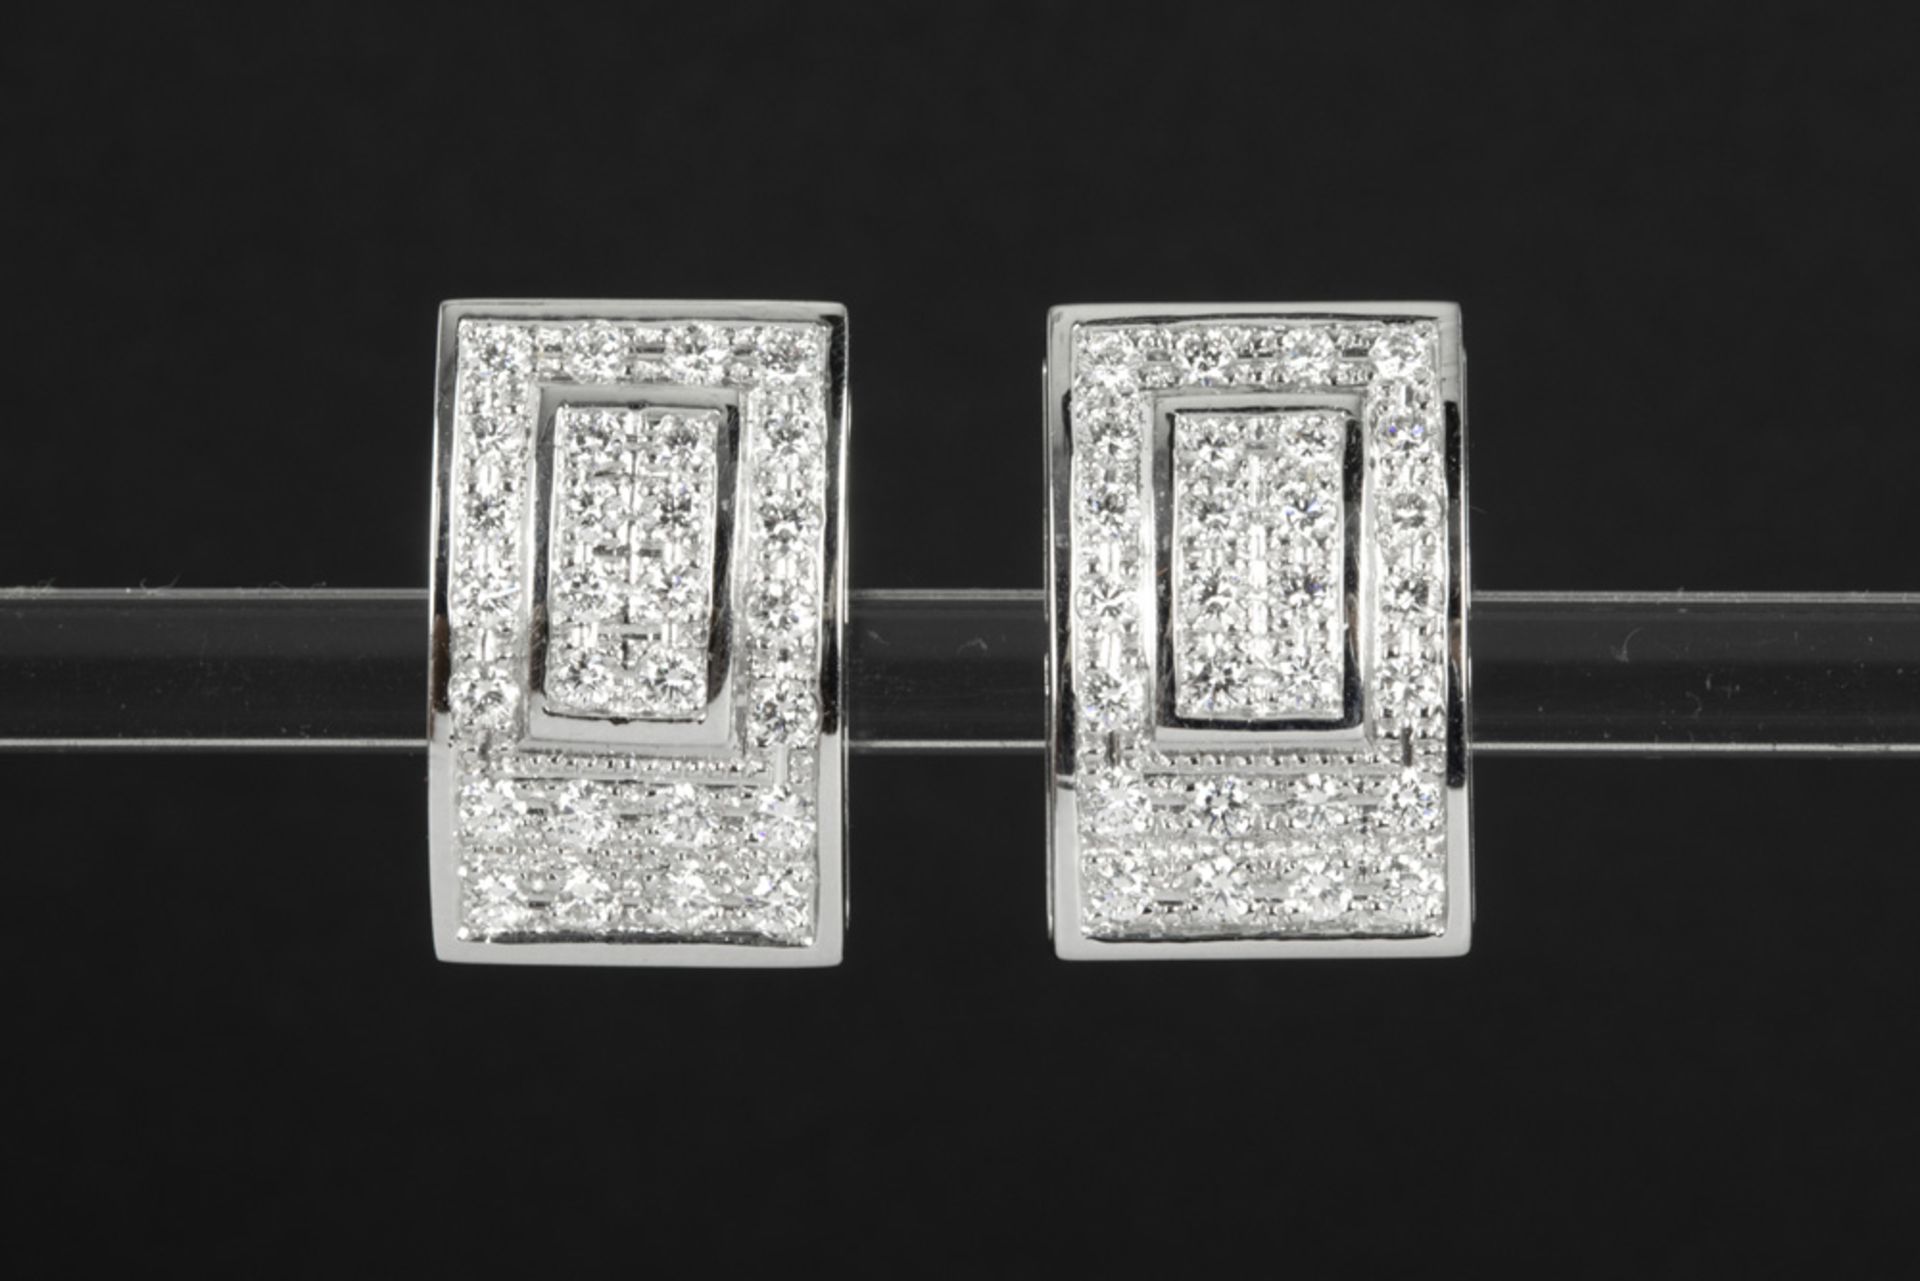 pair of earrings in white gold (18 carat) with 1,75 carat of high quality brilliant cut diamonds ||